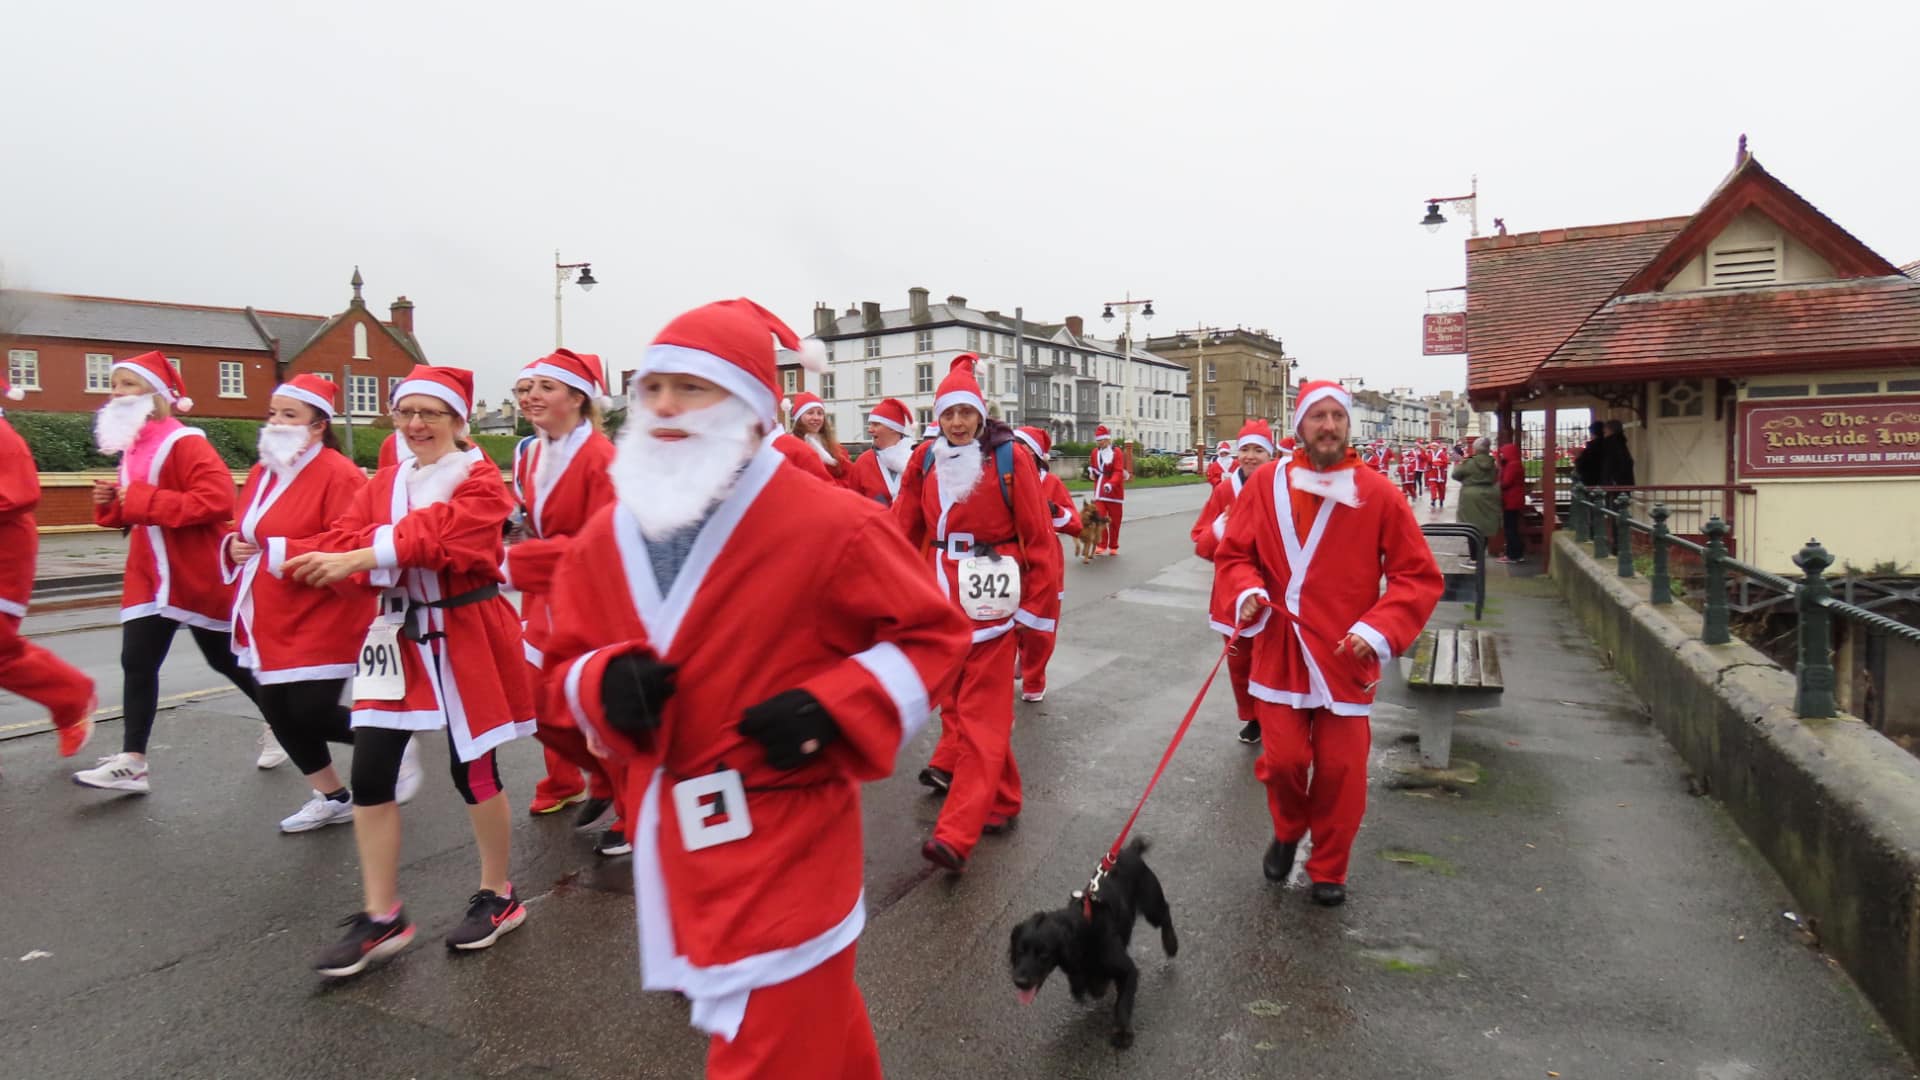 Runners enjoyed the Southport Santa Sprint for Queenscourt Hospice sponsored by Silcock's. Photo by Andrew Brown Media